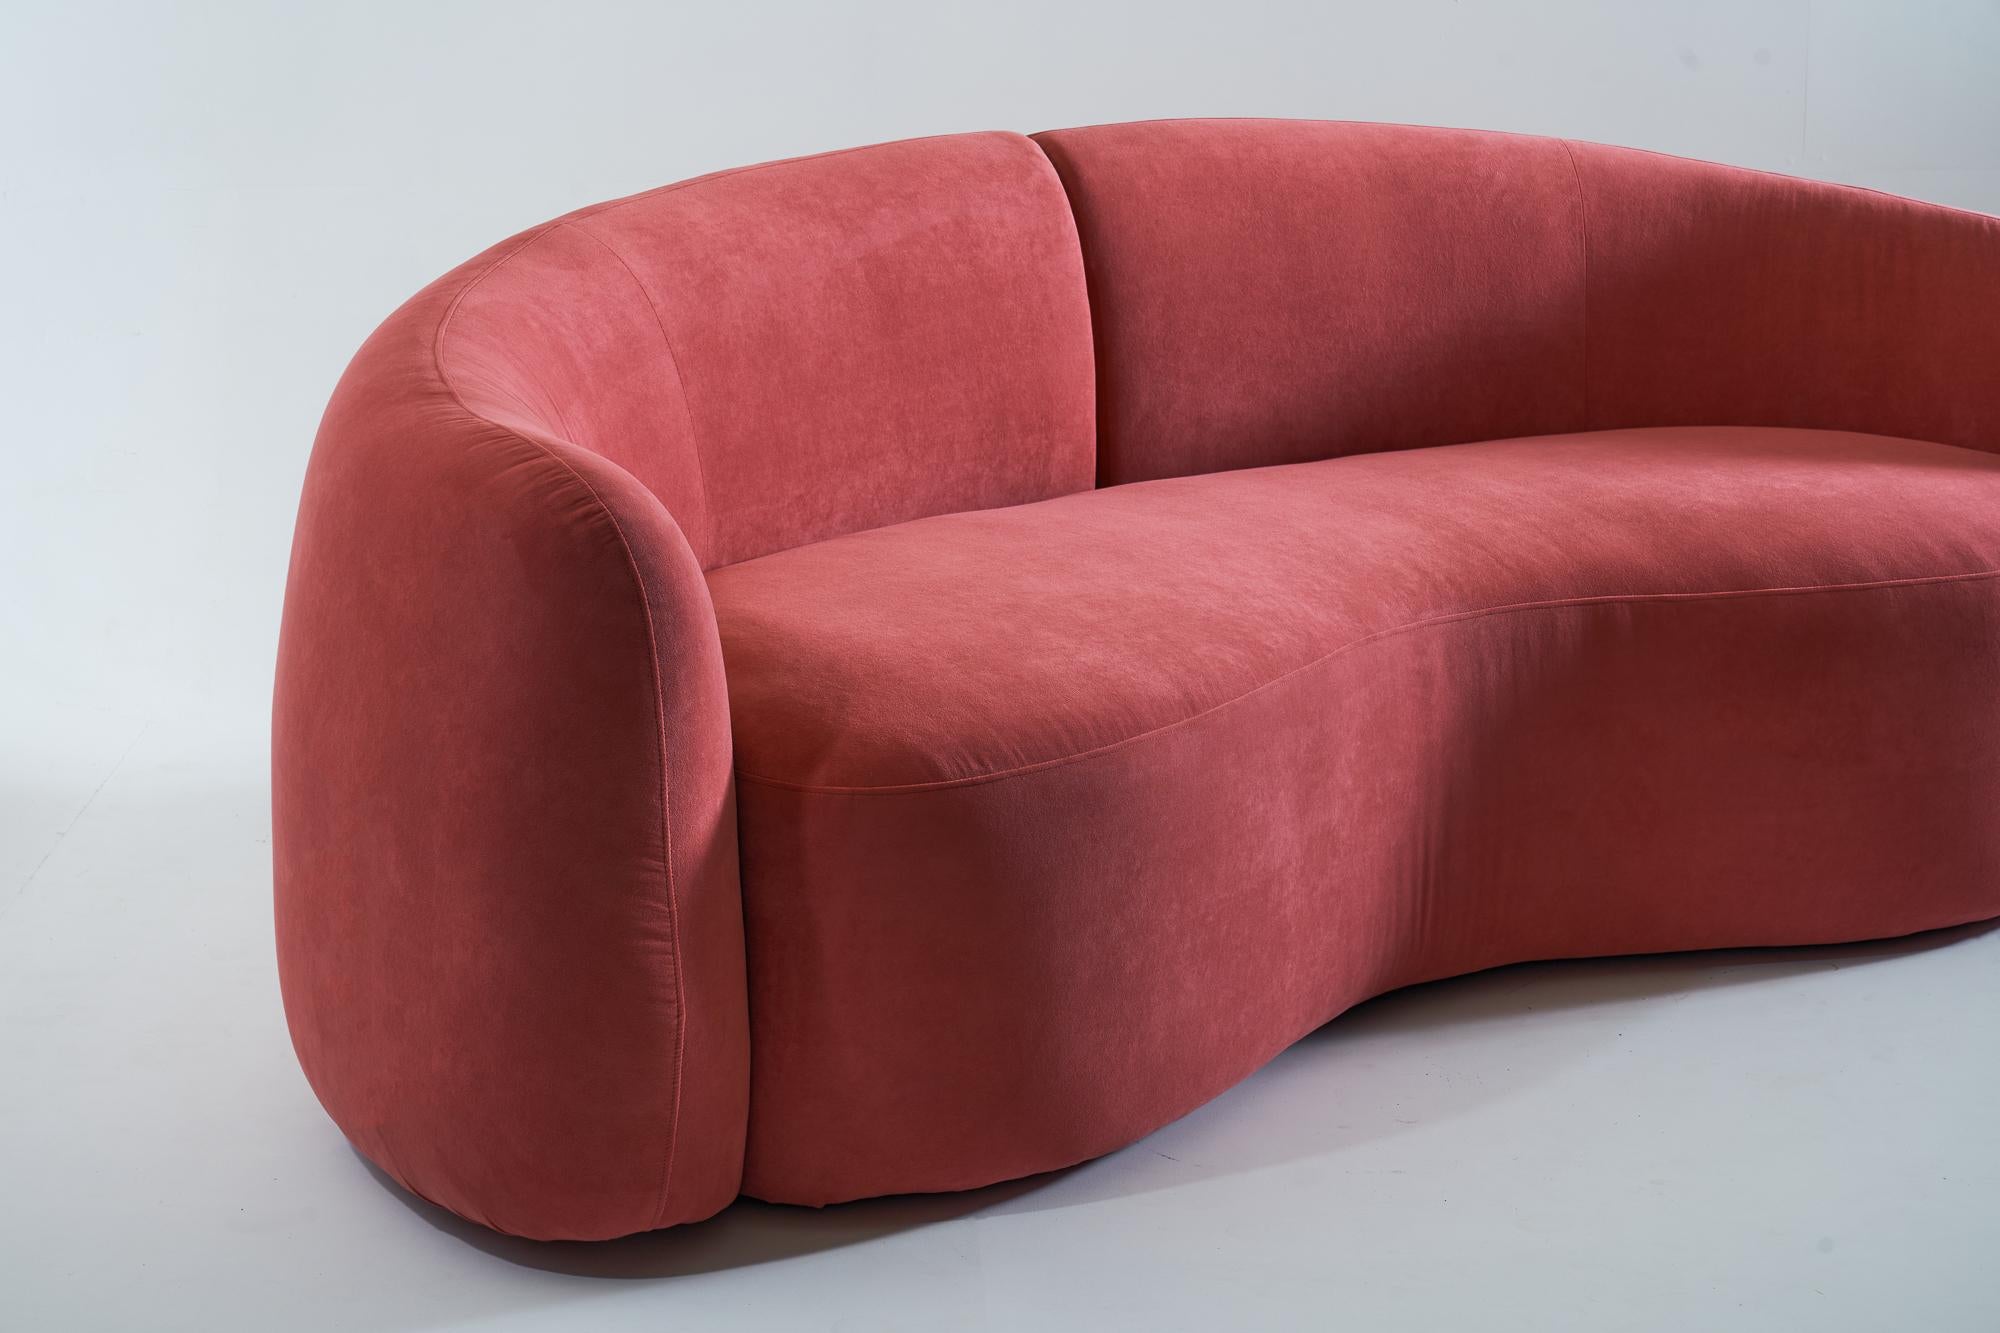 Indian Curved Split back Afgan Sofa in Watermelon Red by Kunaal Kyhaan For Sale